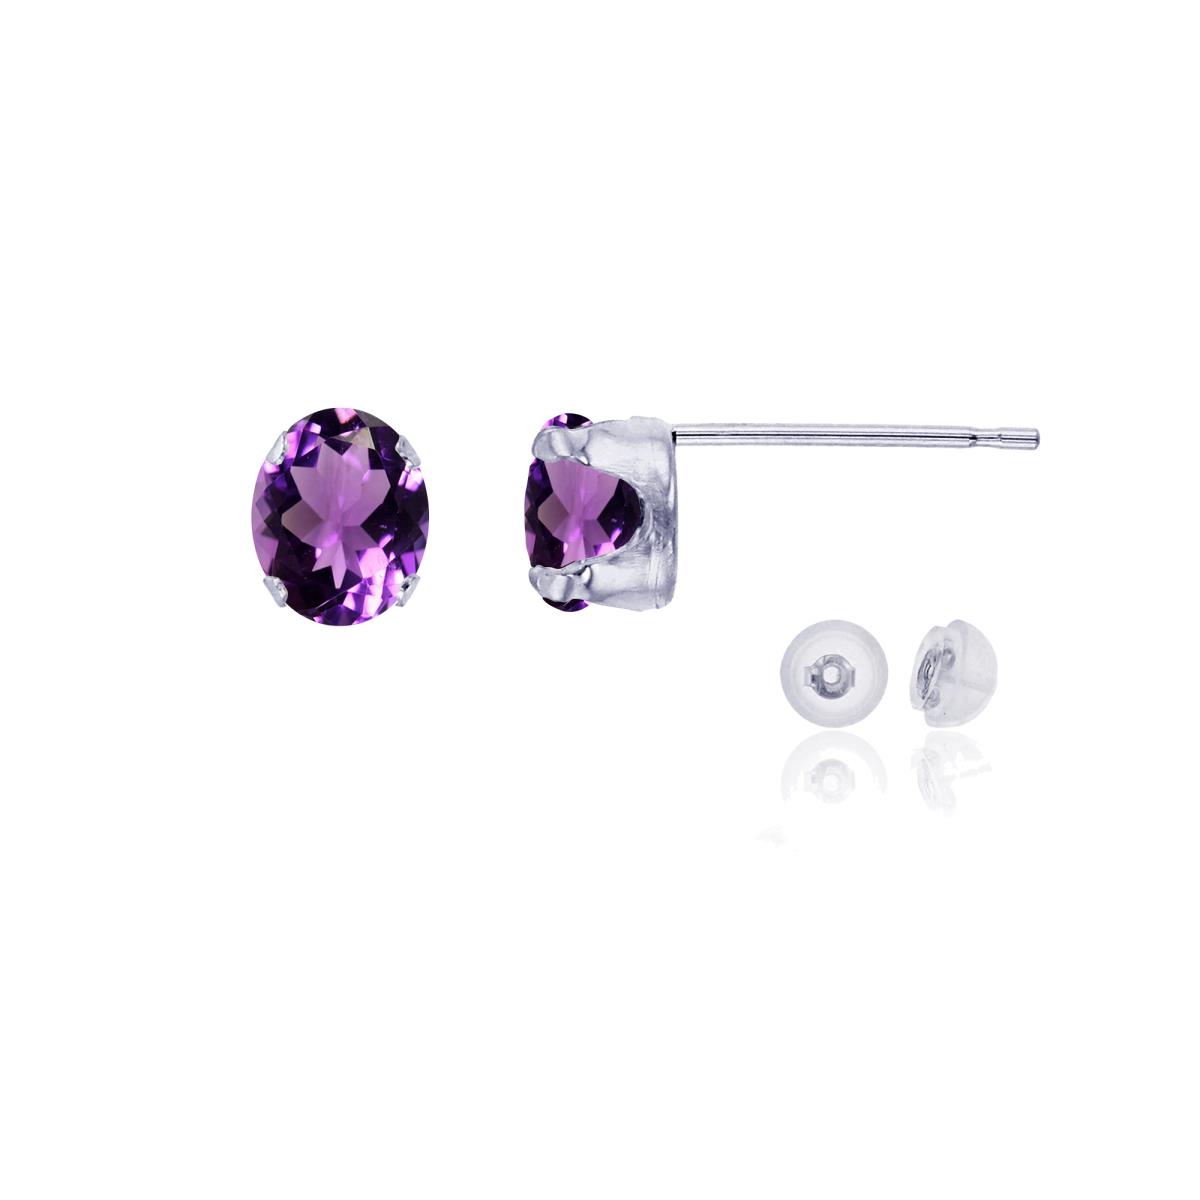 14K White Gold 6x4mm Oval Amethyst Stud Earring with Silicone Back